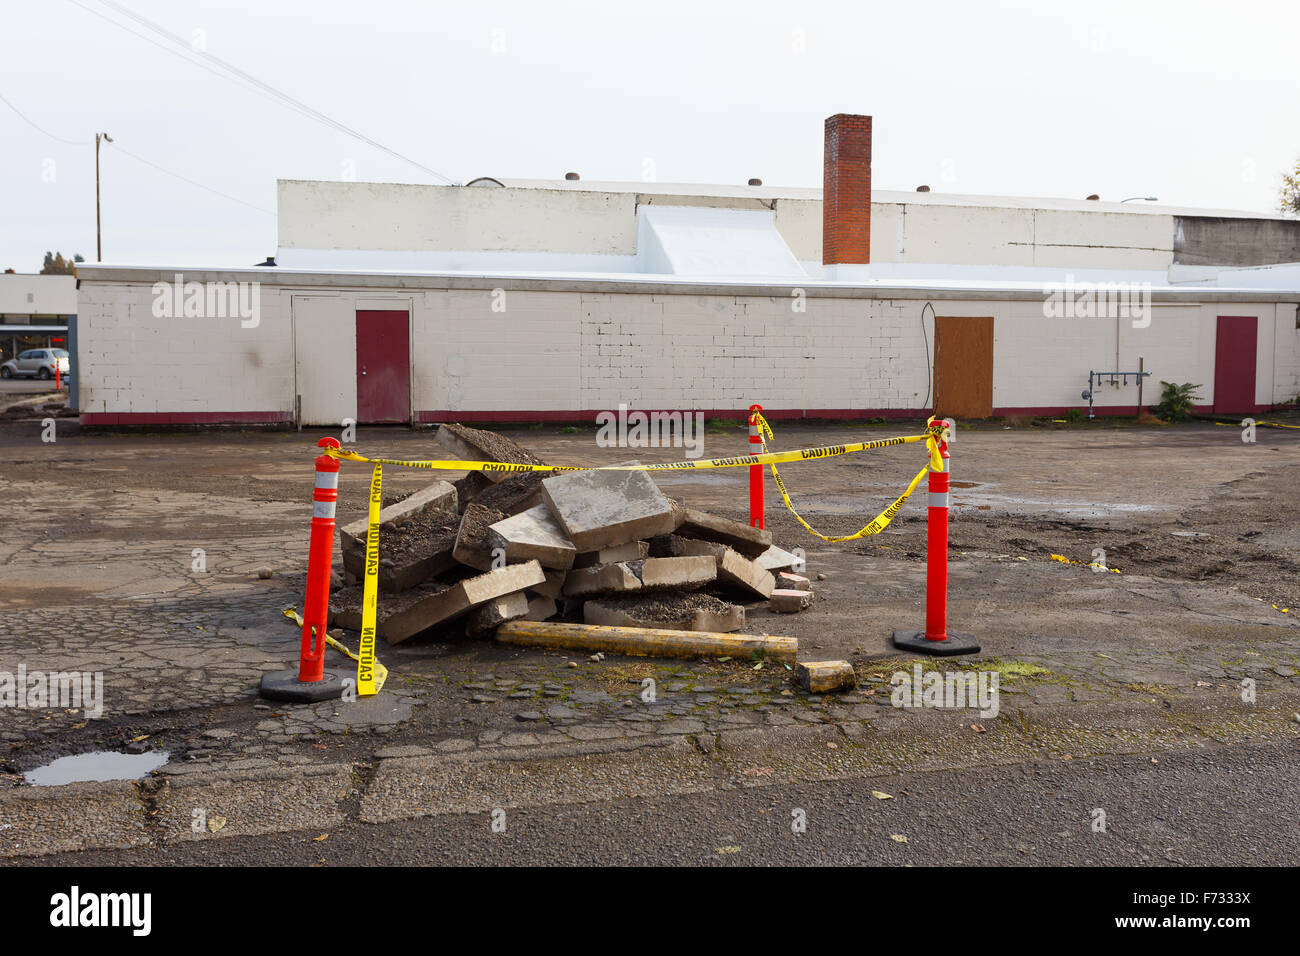 SPRINGFIELD, OR - NOVEMBER 12, 2015: Concrete rubble is piled together at a building demolition and construction site. Stock Photo